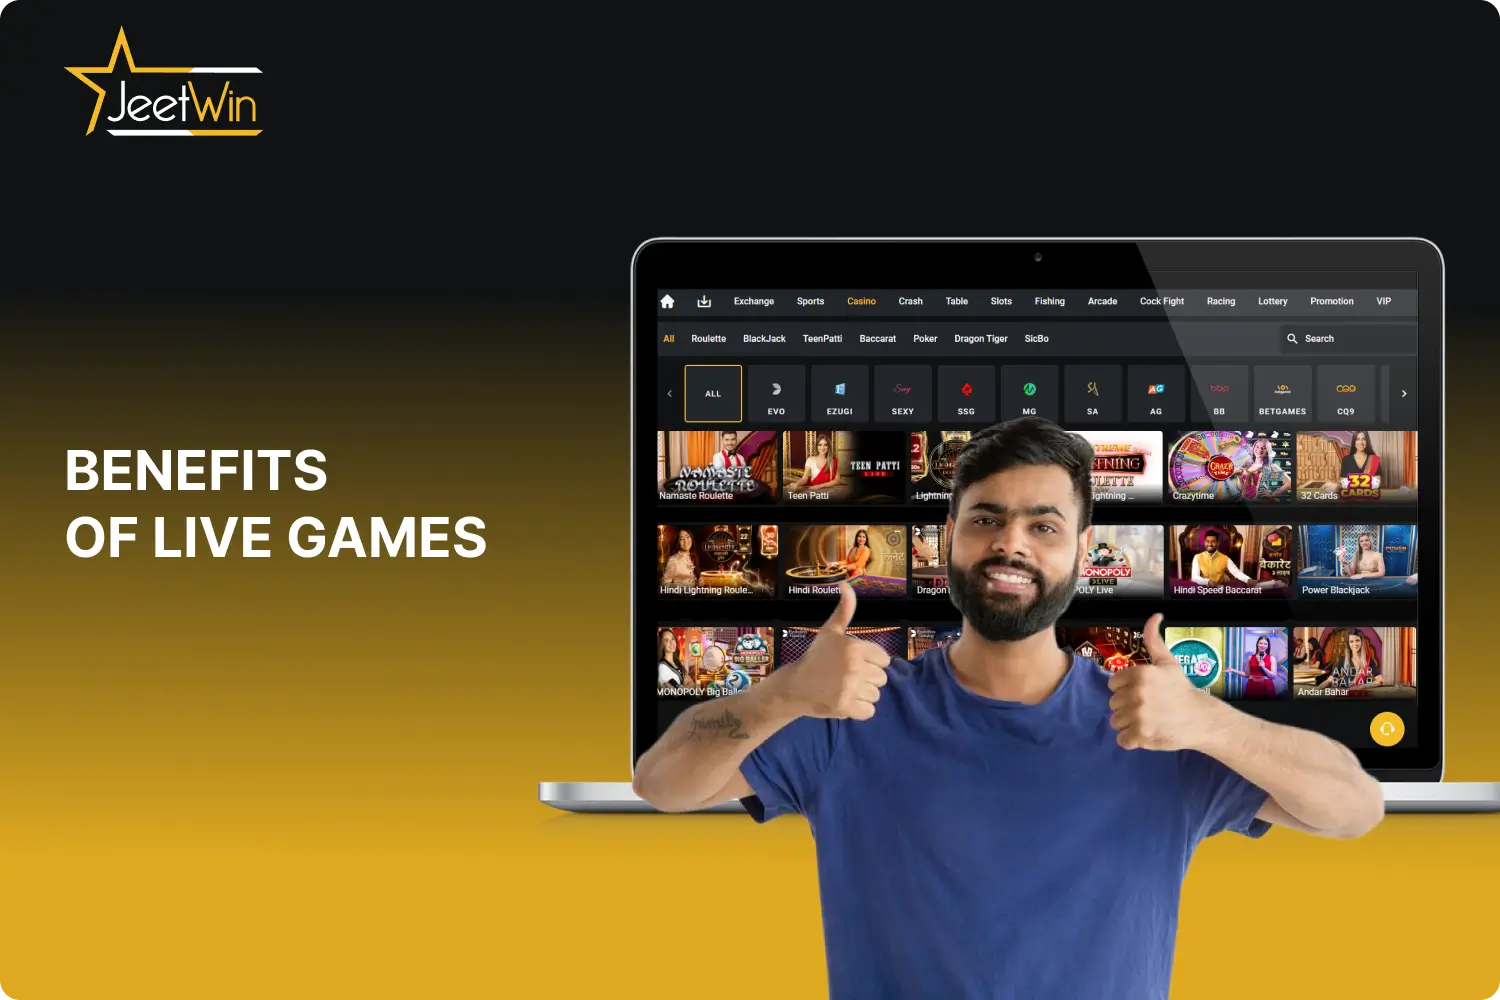 Live games at Jeetwin casino has various benefits that have been appreciated by thousands of Indian players